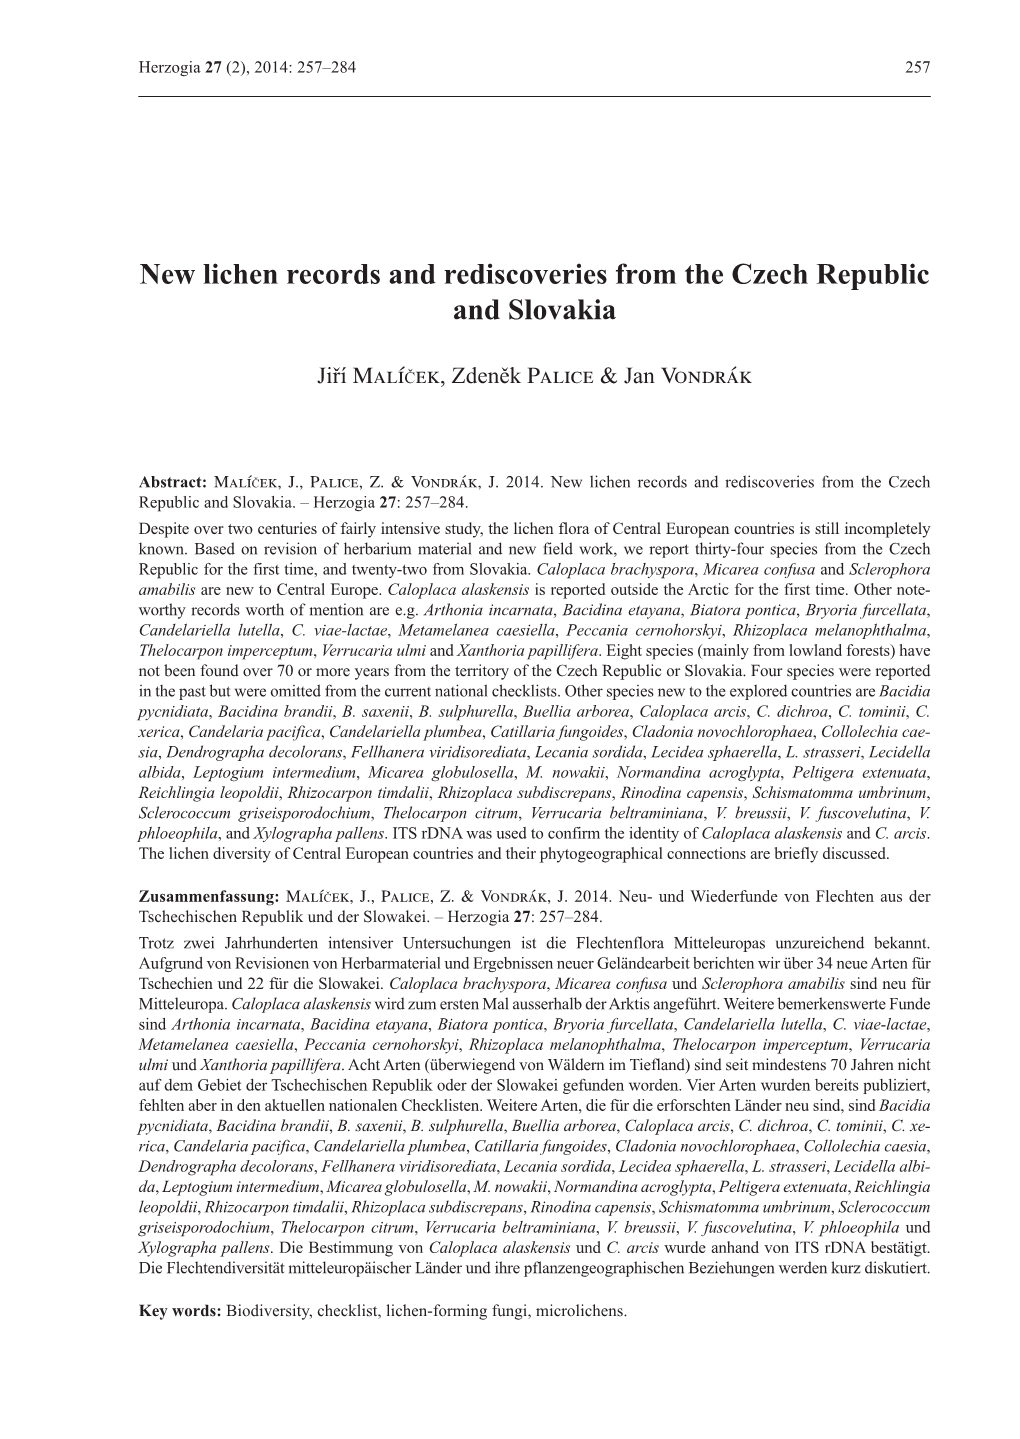 New Lichen Records and Rediscoveries from the Czech Republic and Slovakia